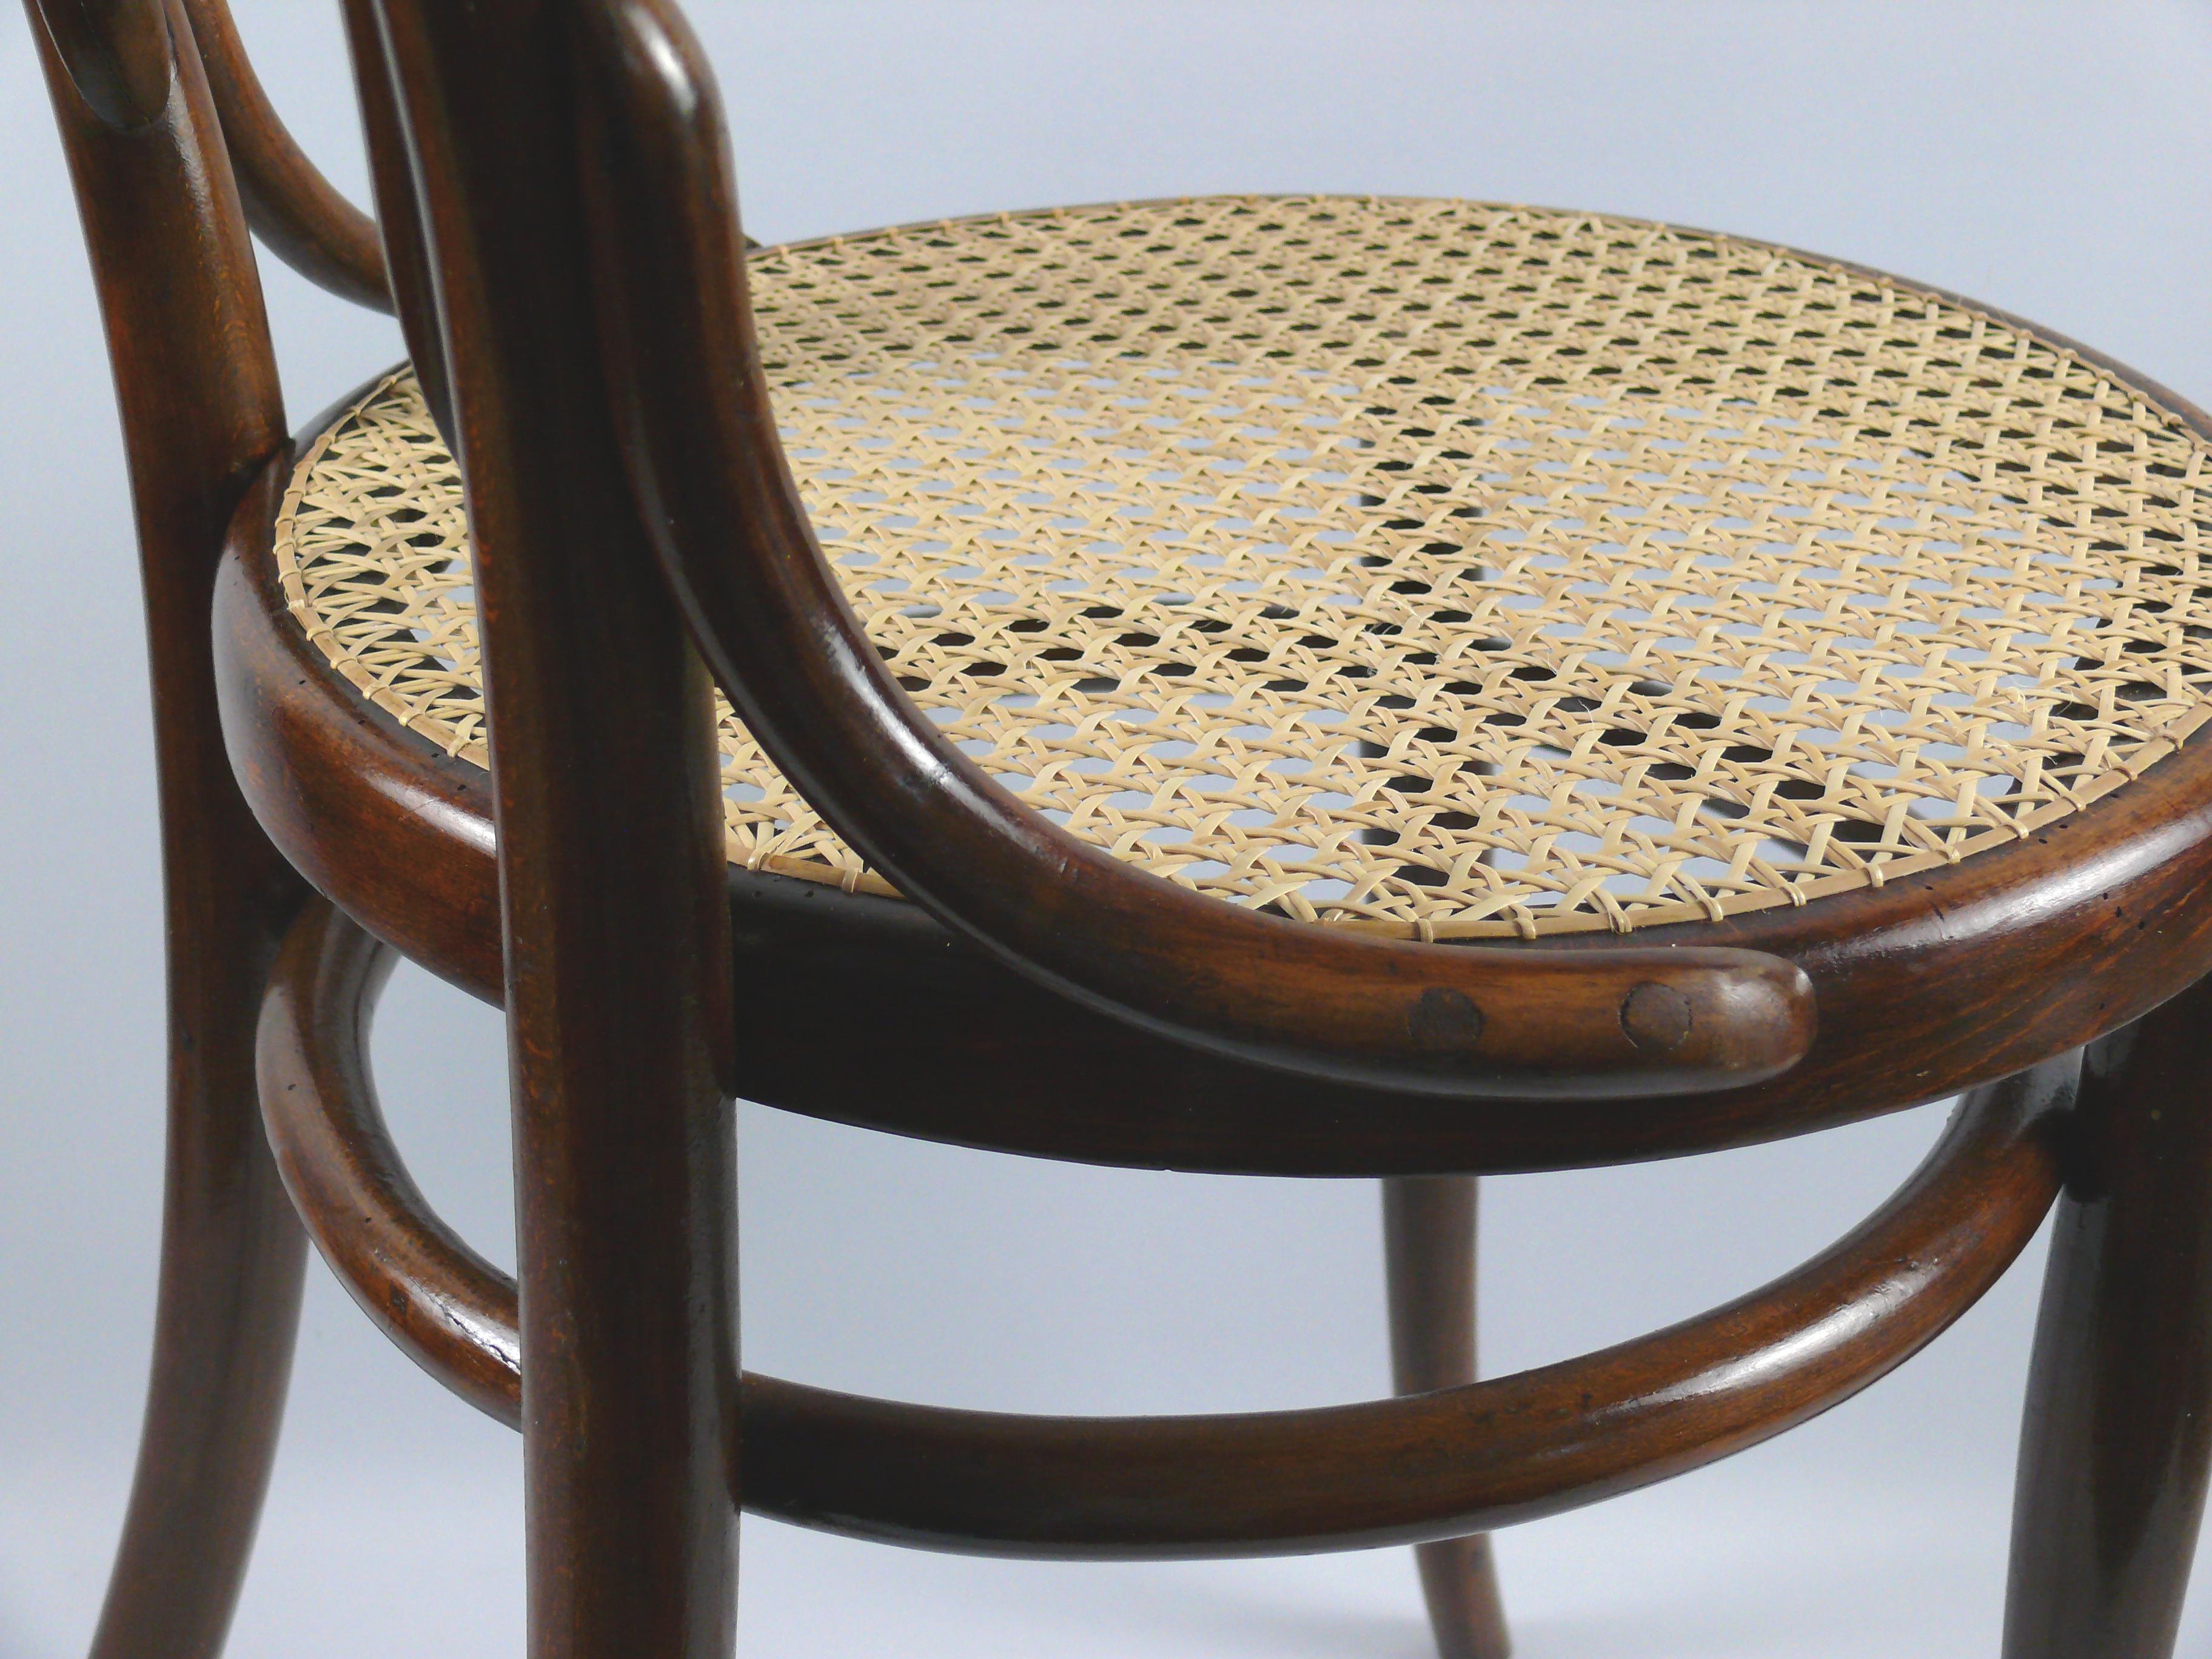 Set of 2 Original Thonet Bentwood Chairs No. 14, Late 19th In Good Condition In Schwerin, MV